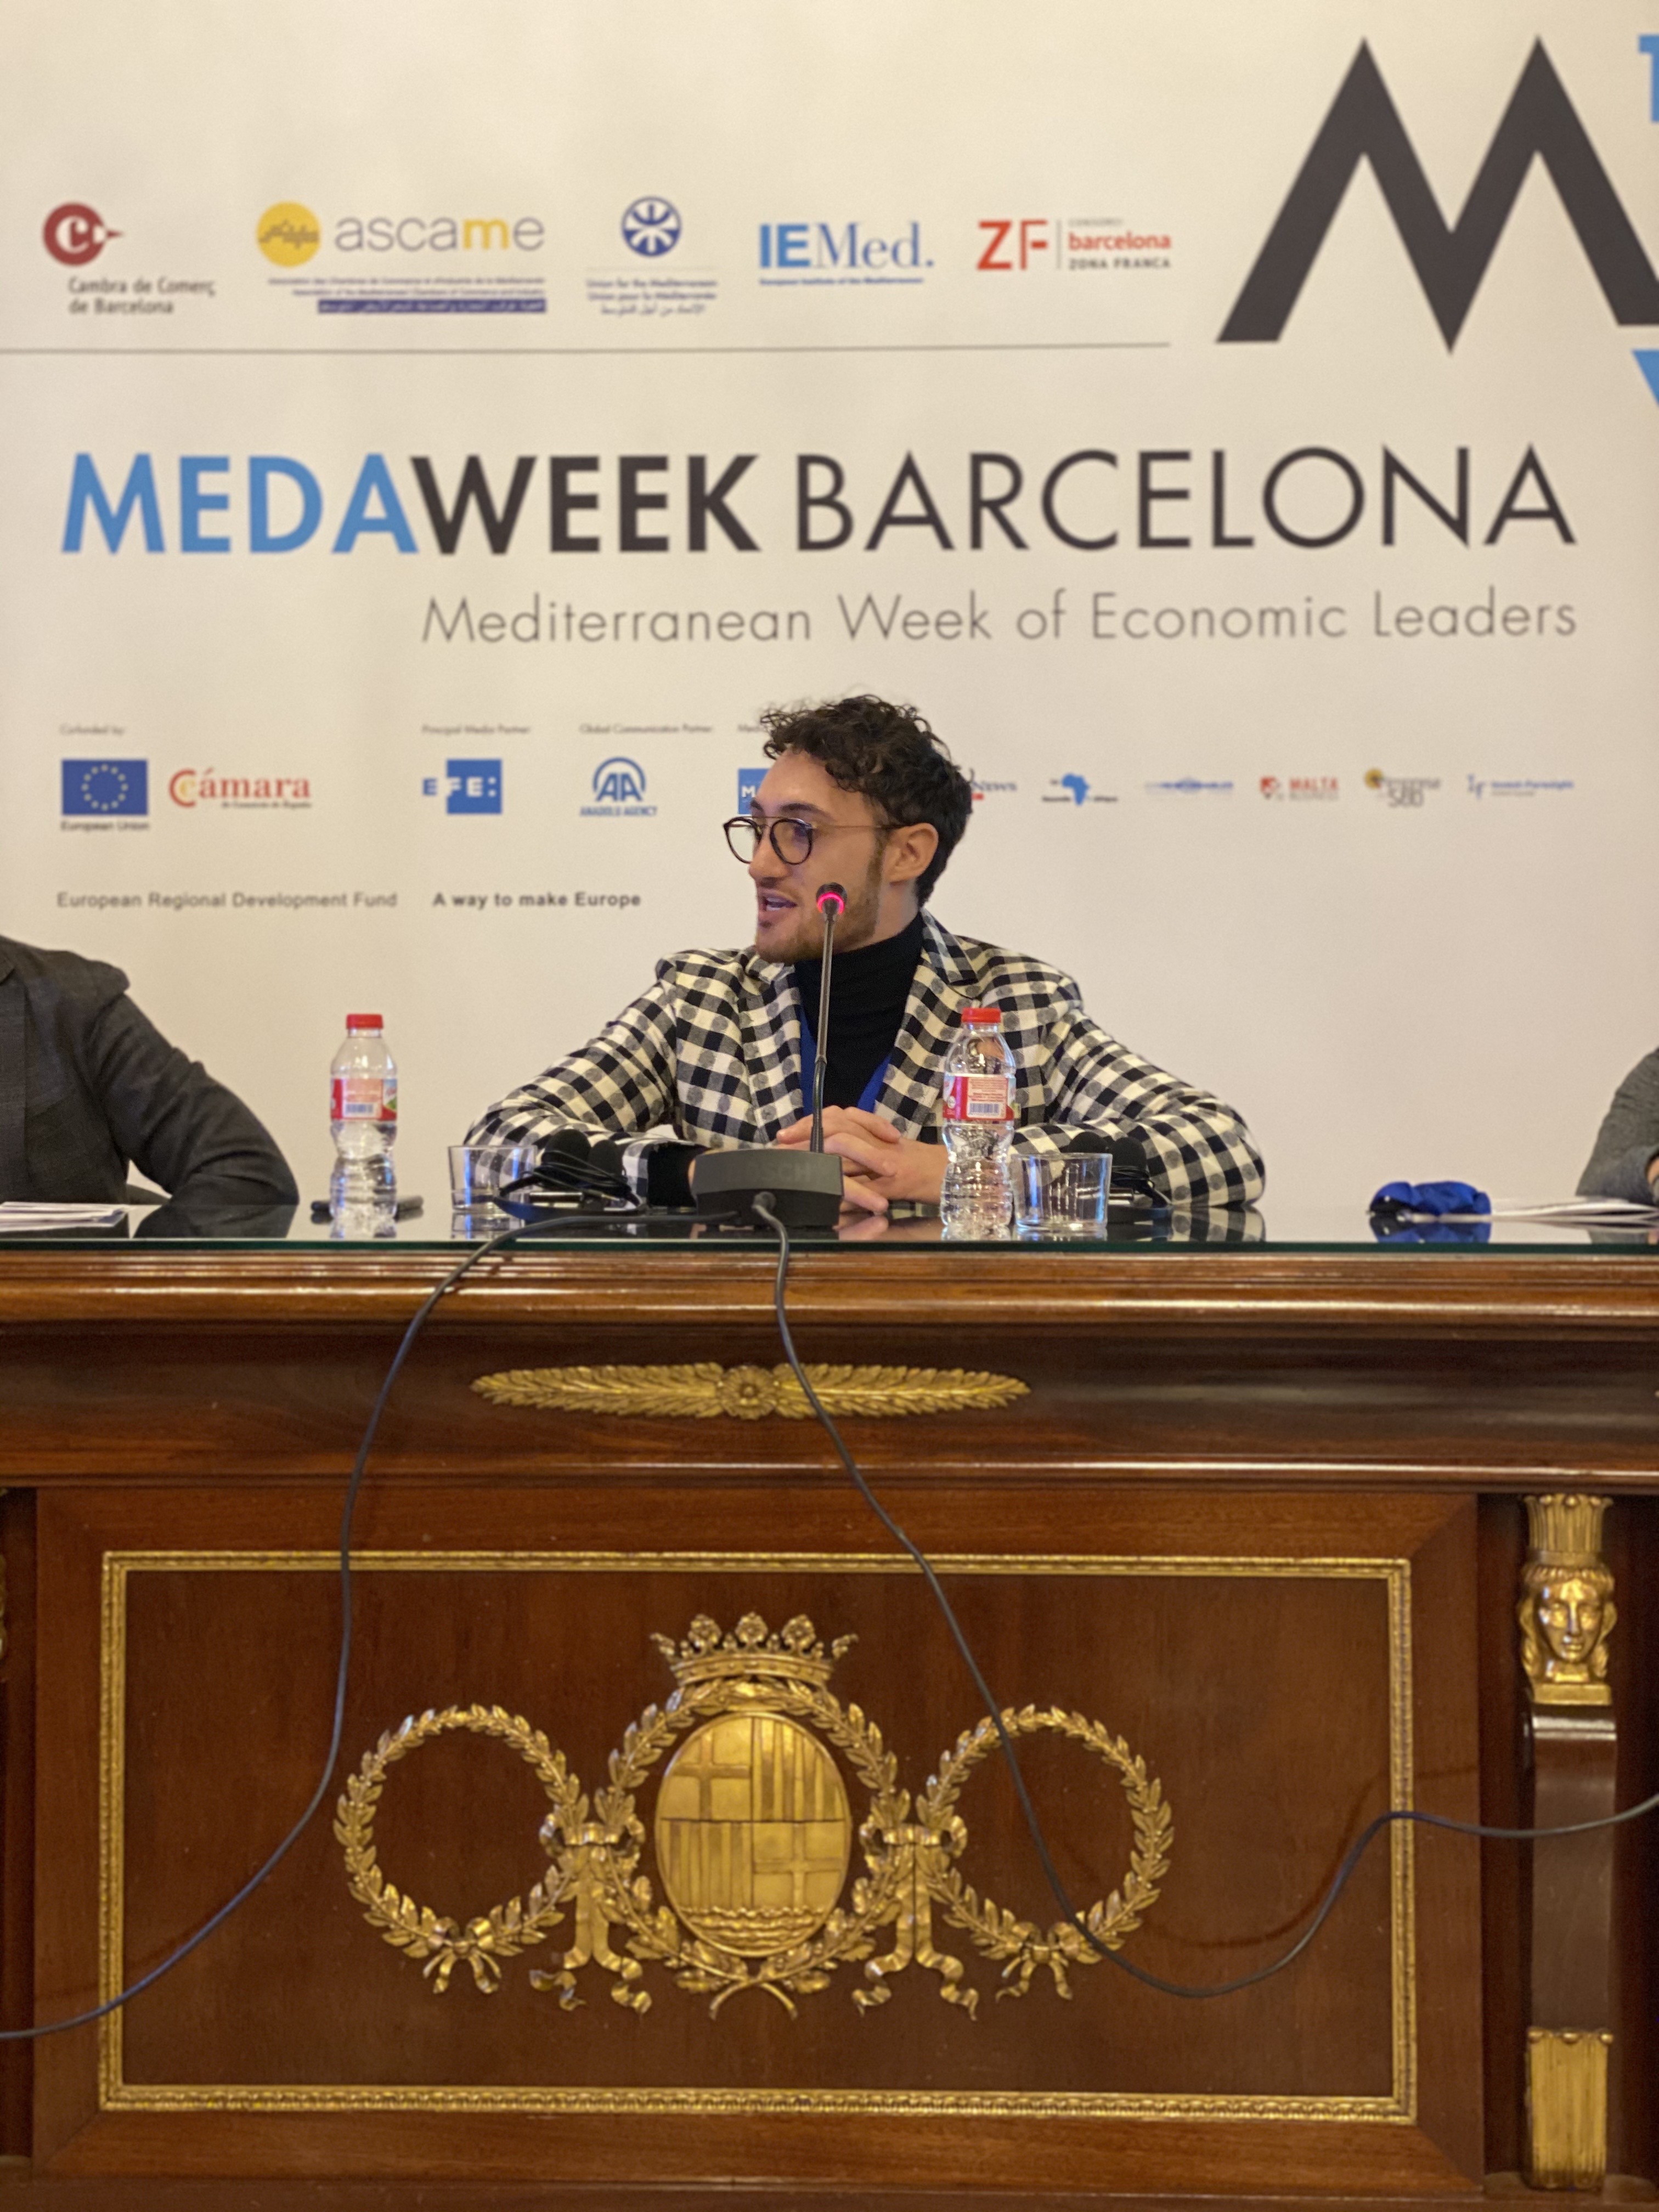 THE ARAB FASHION COUNCIL REPRESENTS THE FASHION INDUSTRY AT THE MEDITERRANEAN WEEK OF ECONOMIC LEADERS IN BARCELONA